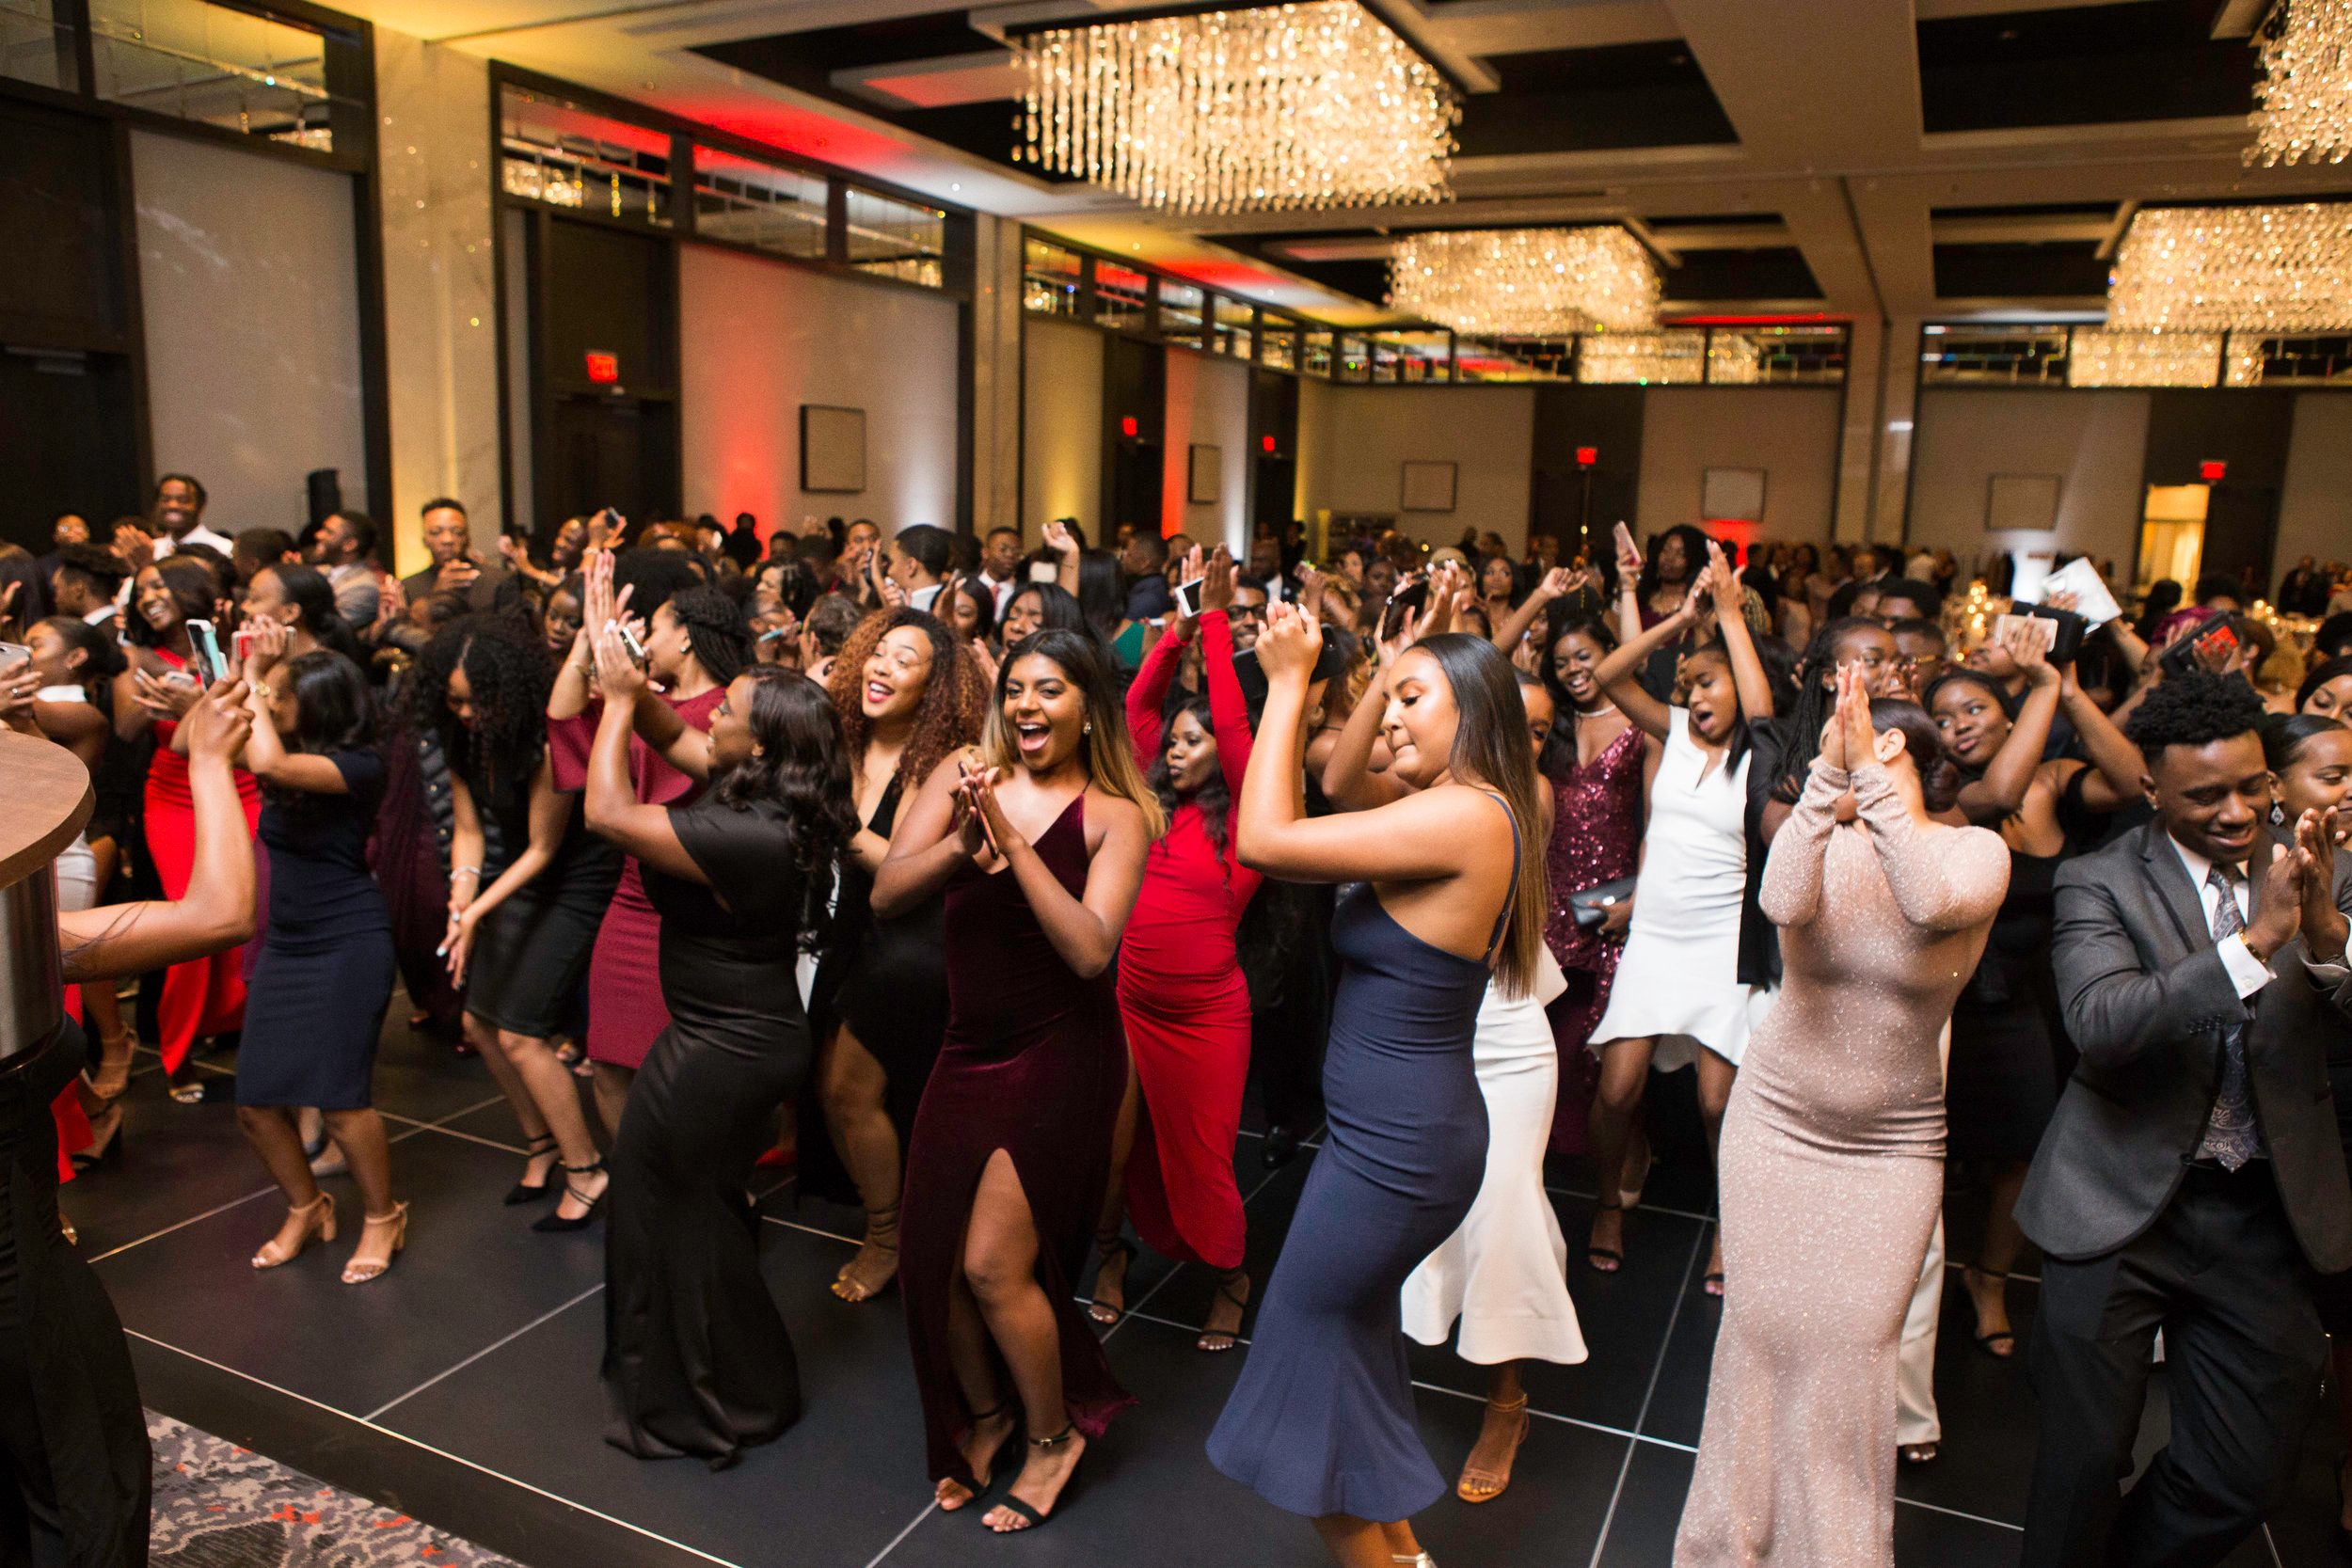 A group of University of Maryland students dancing.